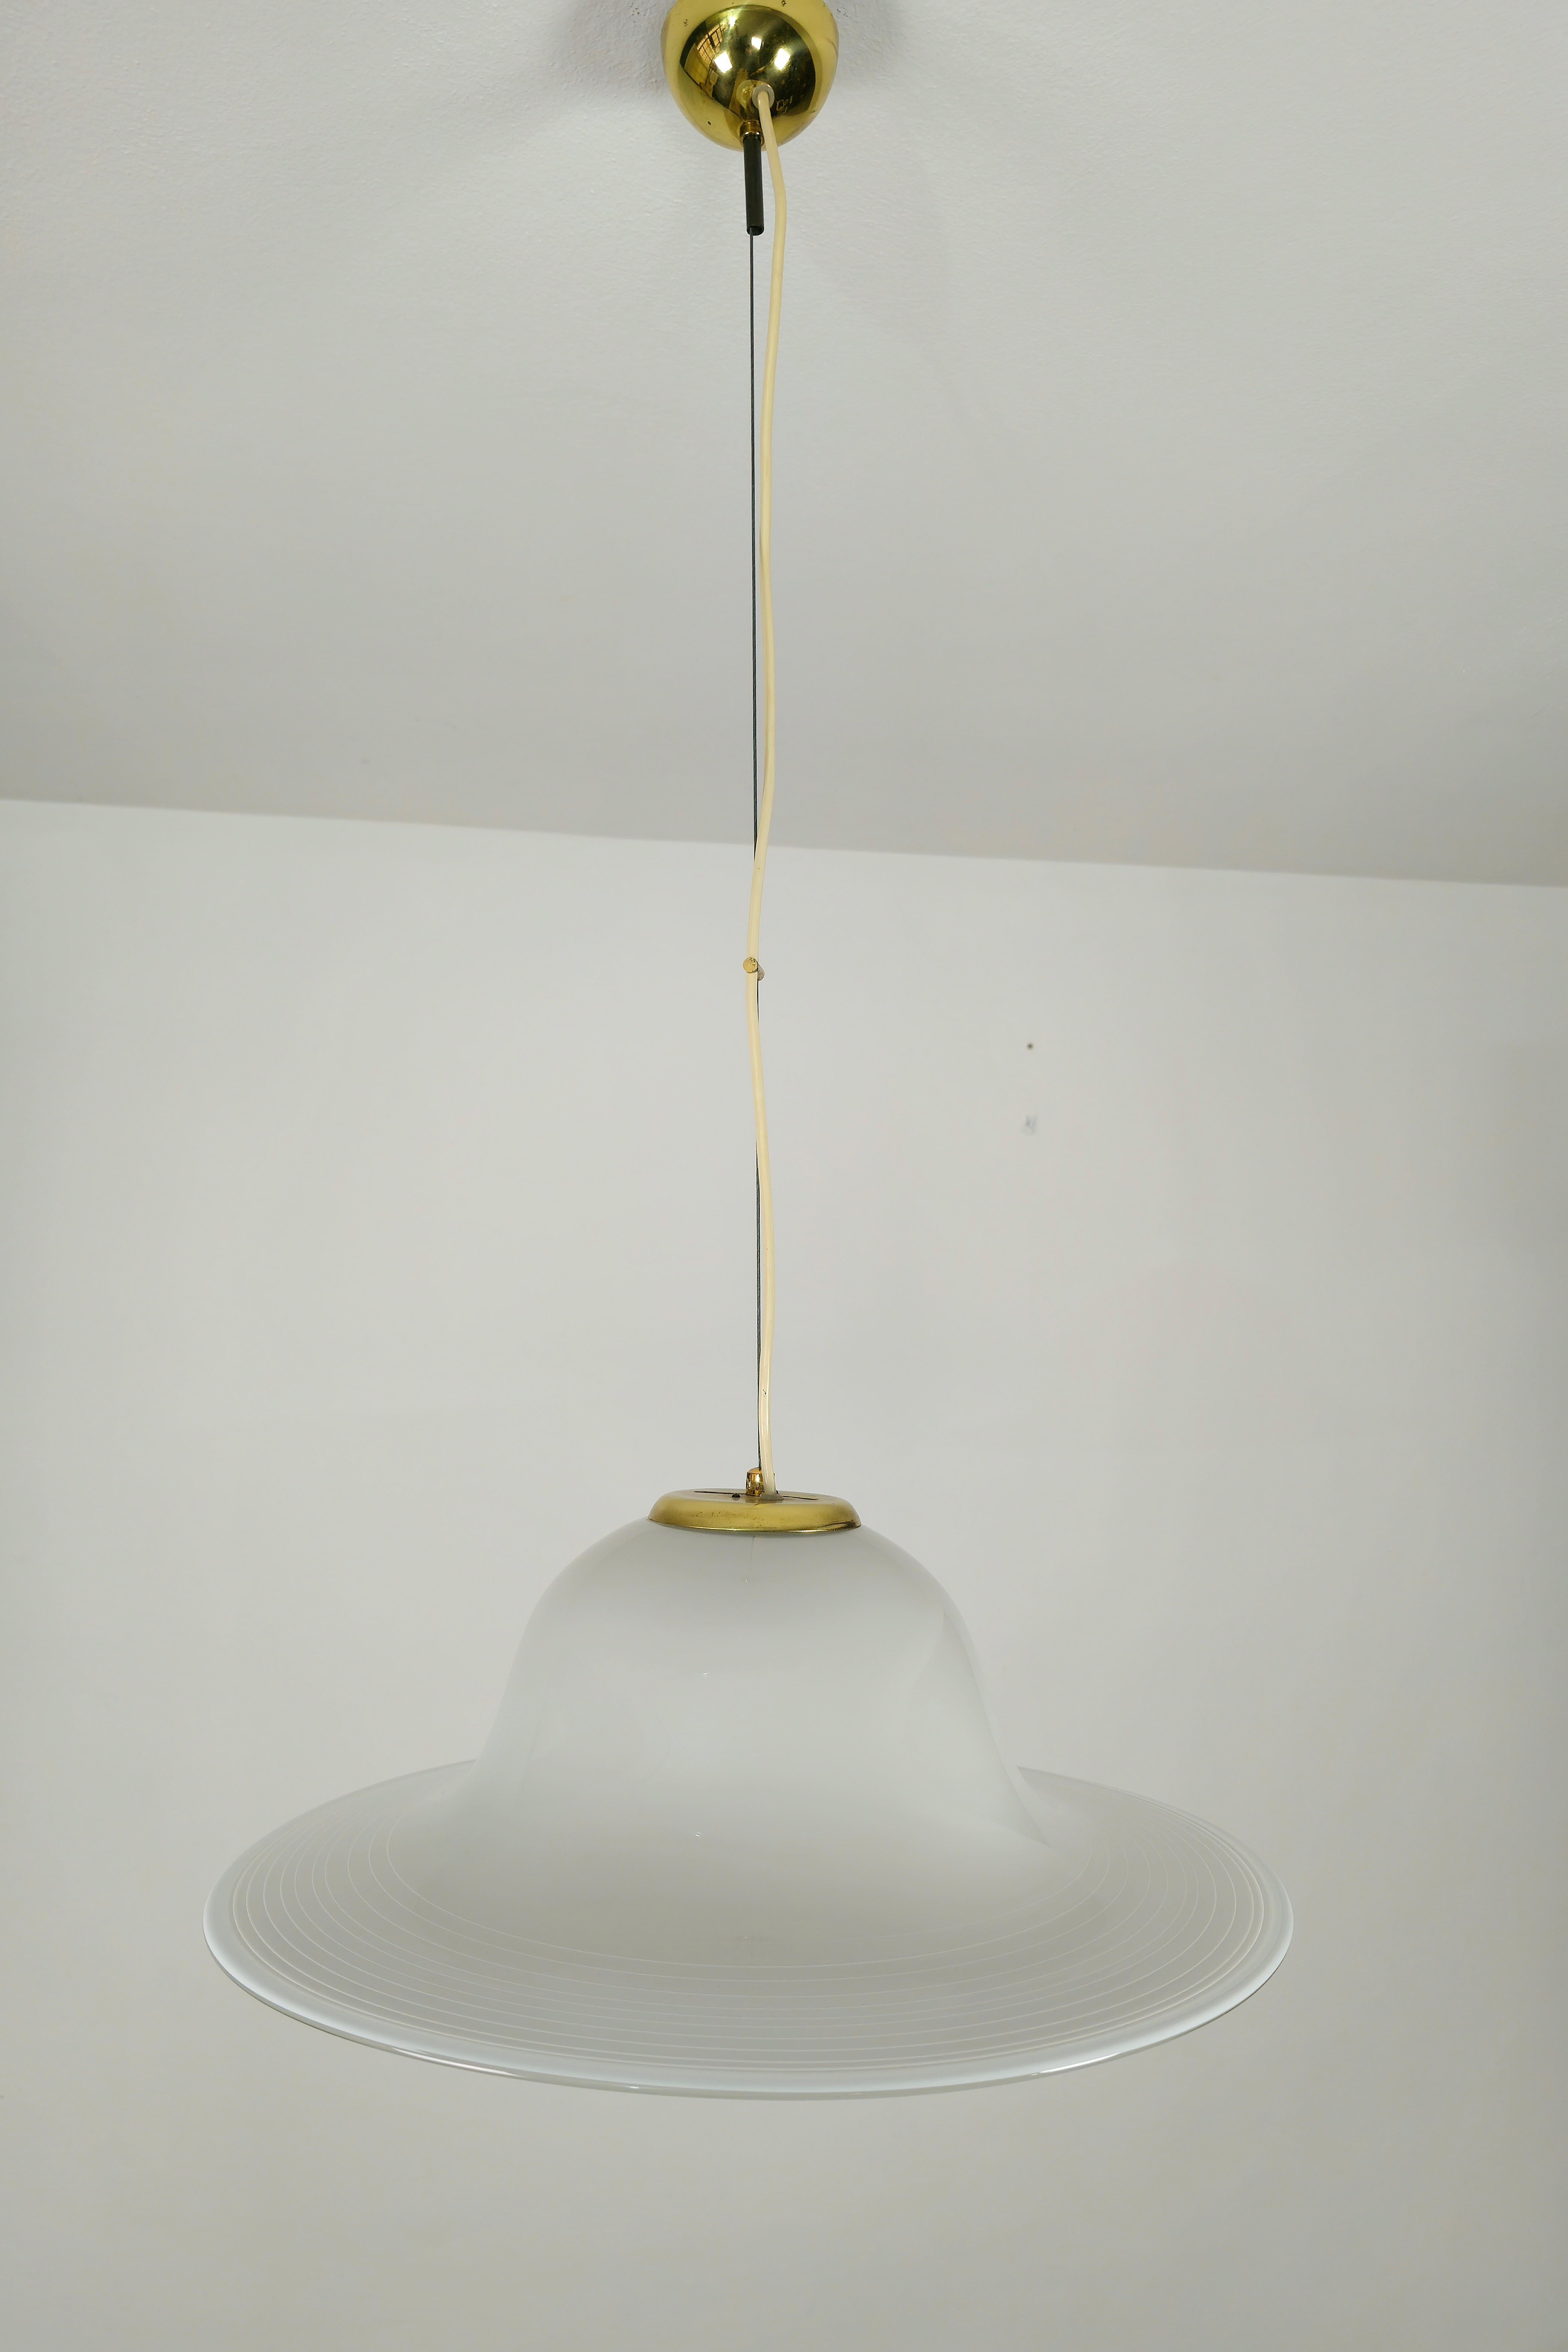 Chandelier Pendant Lamp Murano Glass Golden Aluminum Midcentury, Italy, 1970s In Good Condition For Sale In Palermo, IT